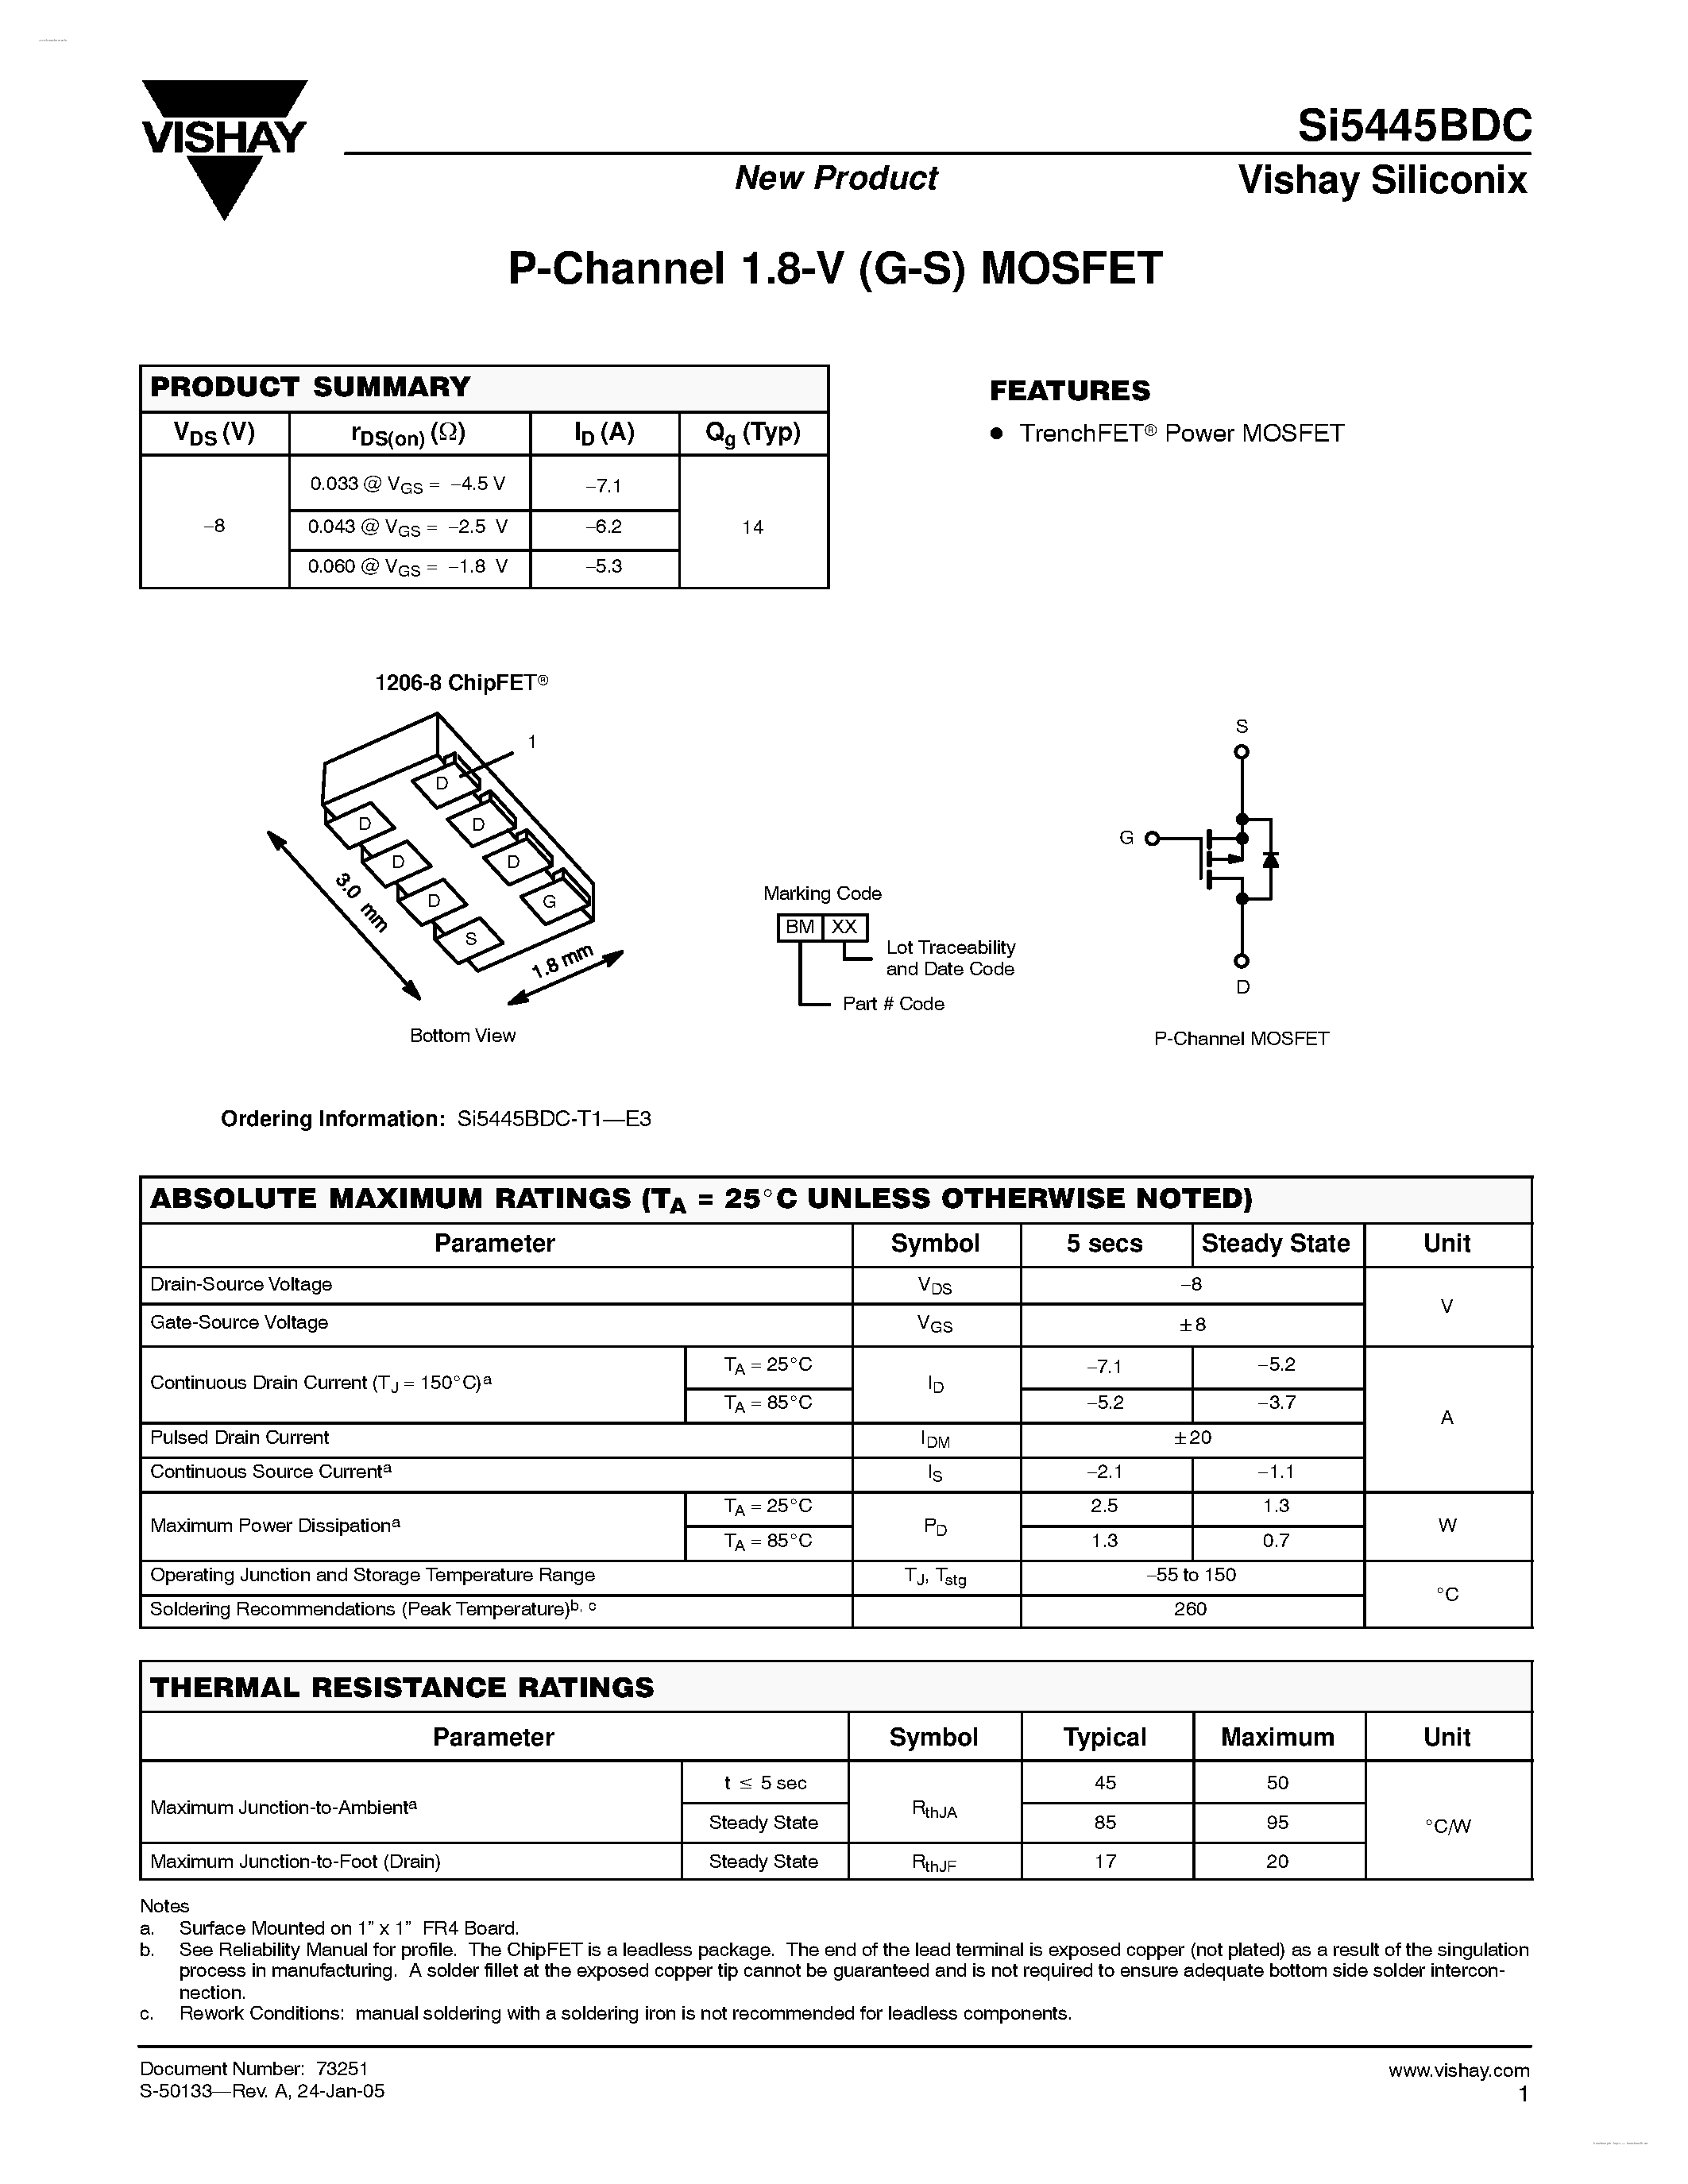 Даташит SI5445BDC - P-Channel 1.8-V (G-S) MOSFET страница 1